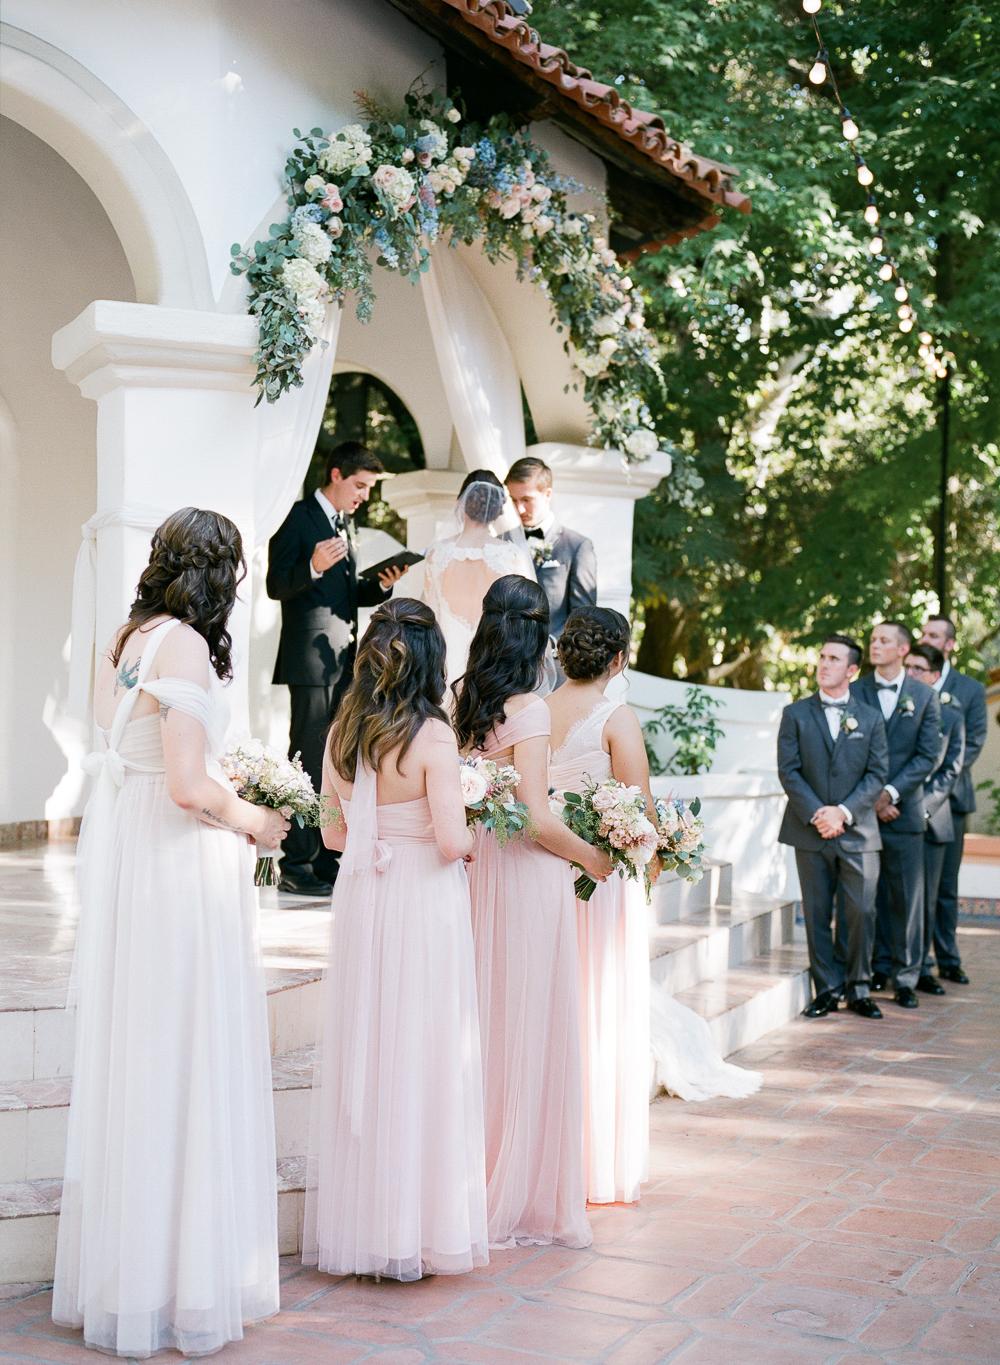 Blush + Blue Pair Up For This Beautiful Bash